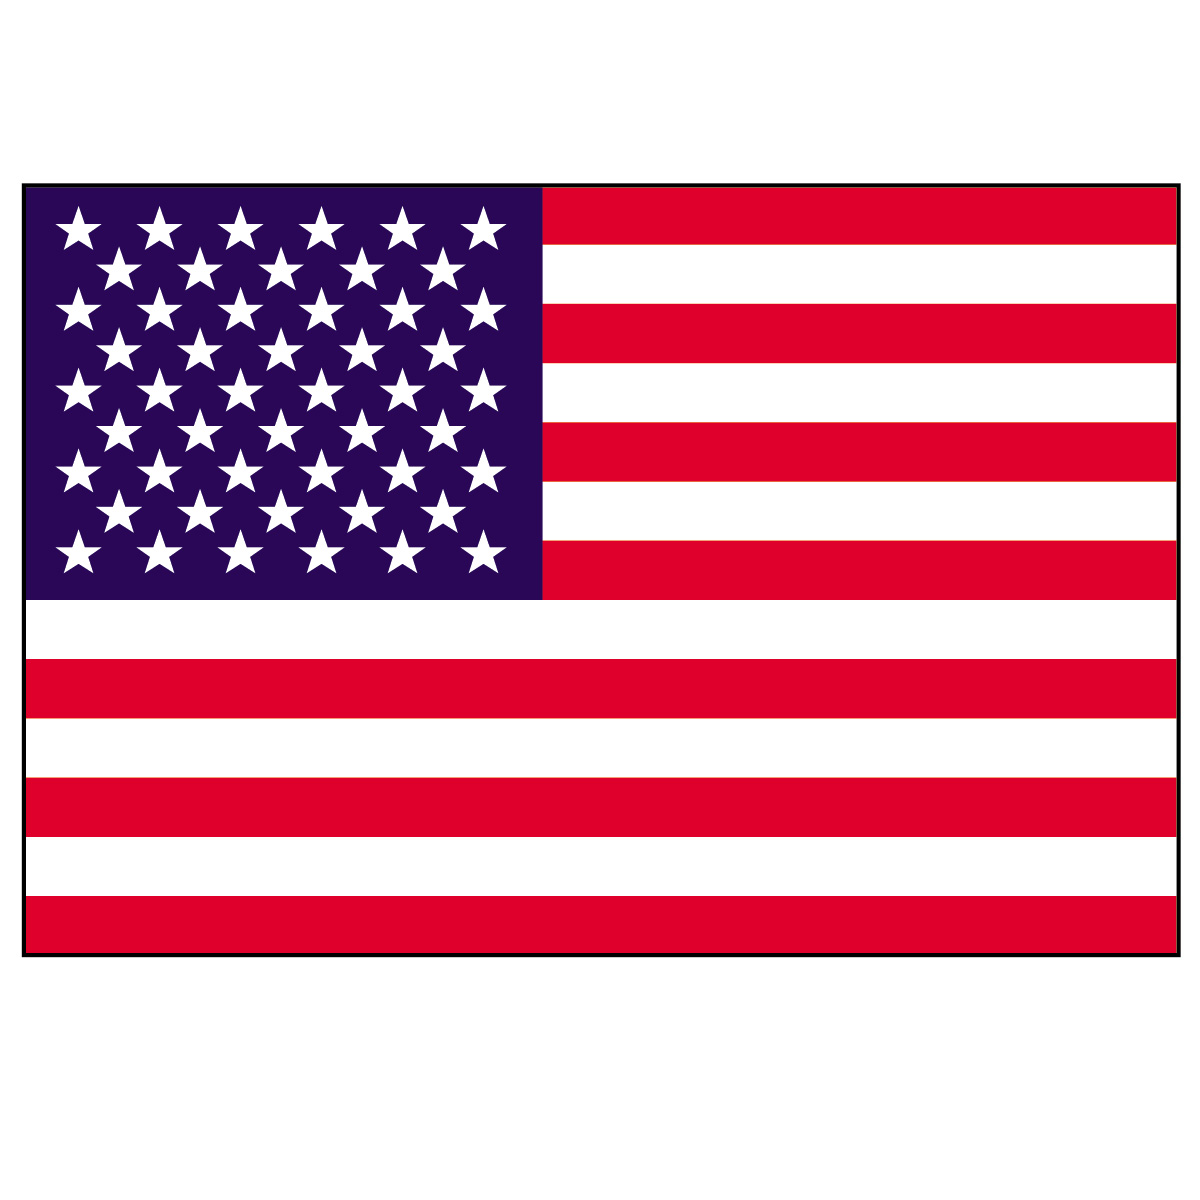 United States Flag Clip Art In Color  An Illustration Of The U S  Flag